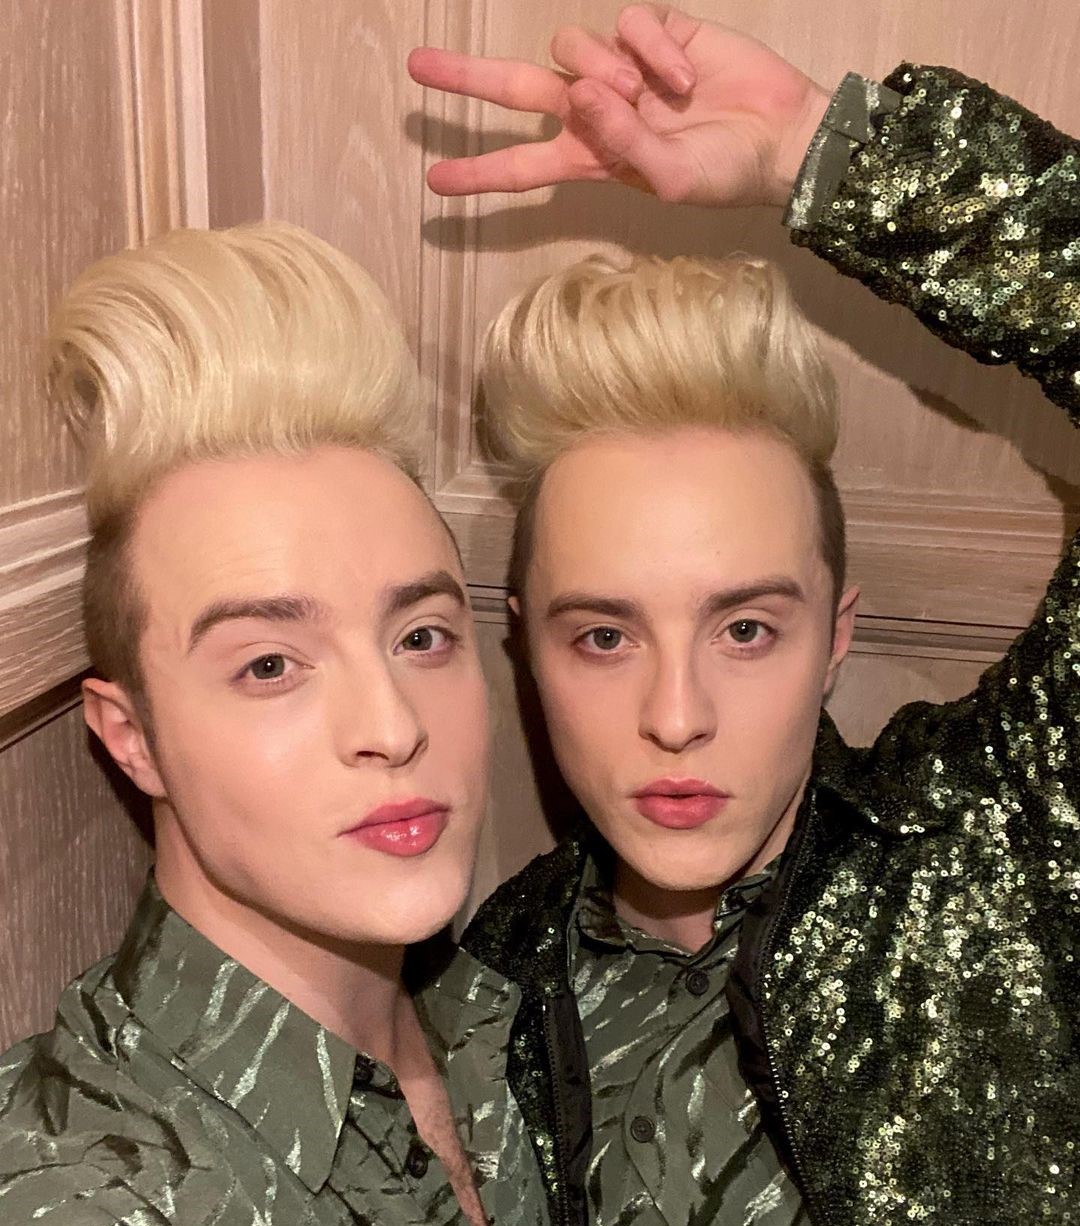 Jedward, the famous twin duo, humorously parodied Big Brother in a video for a fan amidst the recent Louis Walsh controversy. Known for their appearances on the show, the twins delivered a birthday message with their signature charm and wit, delighting their fan Mike.